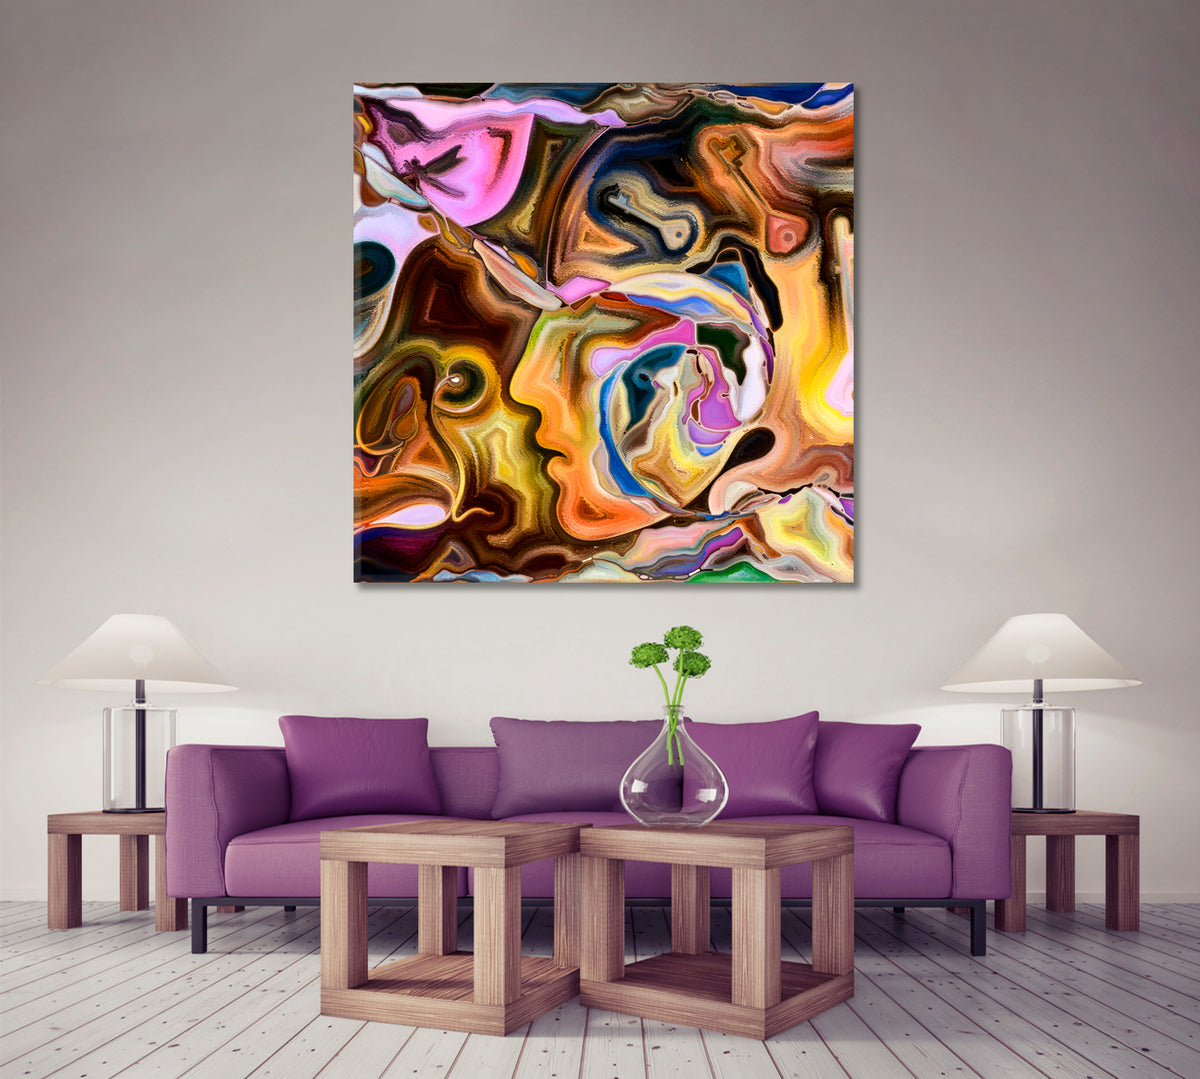 ABSTRACT VARIETY Glamour Modern Art - Square Panel Contemporary Art Artesty 1 Panel 12"x12" 